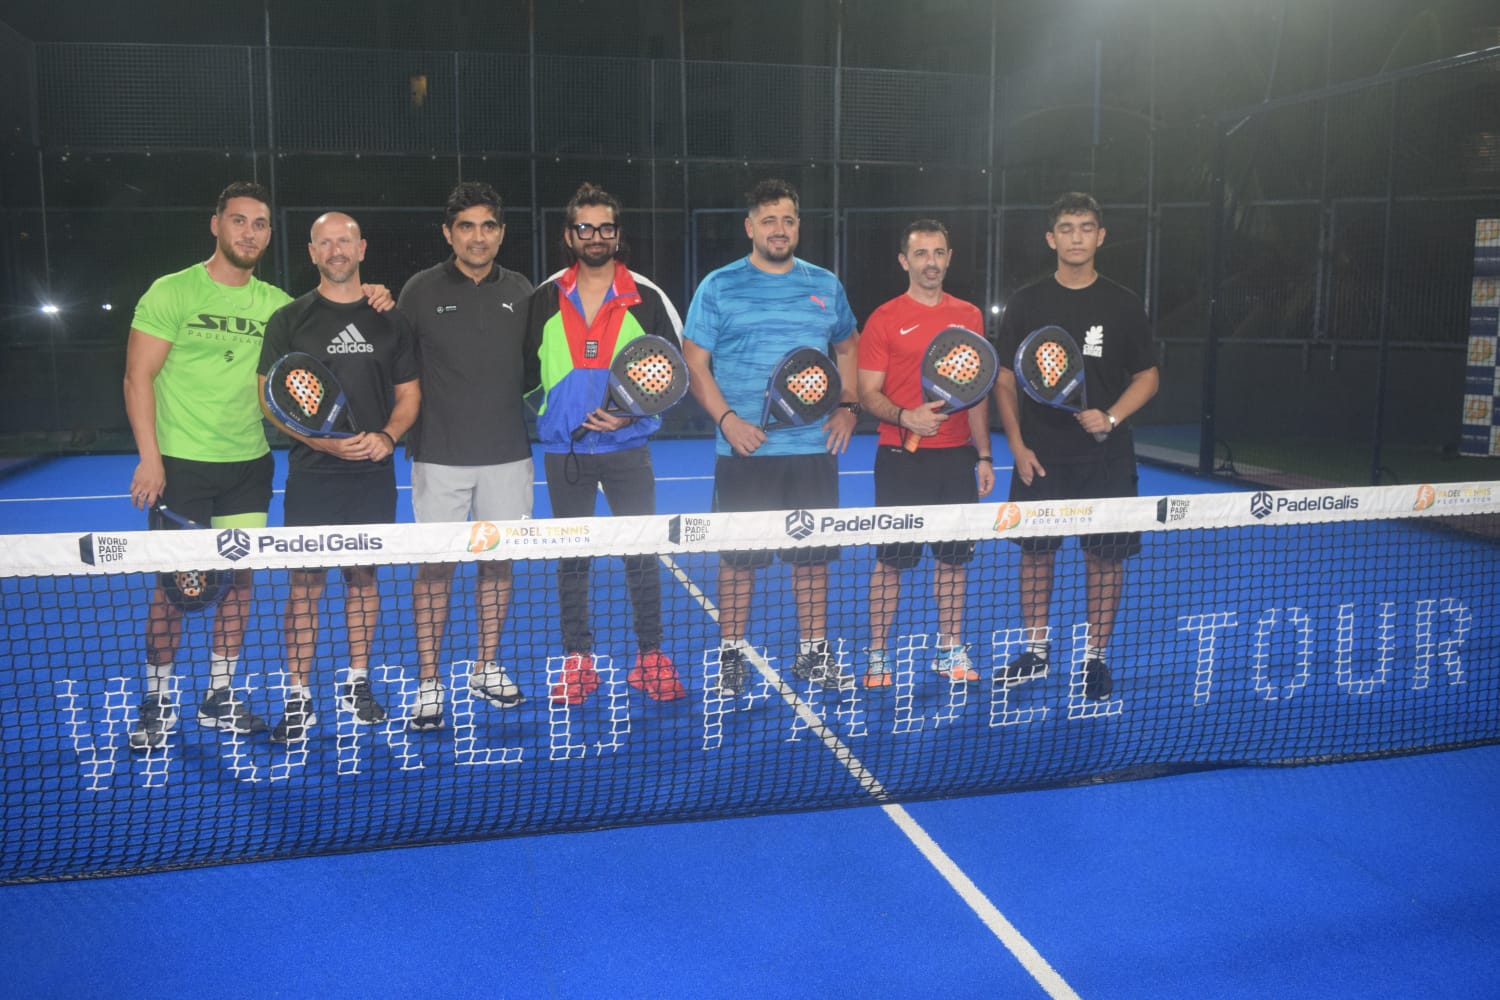 Friendly Match organised by Padel Federation to promote Padel in India